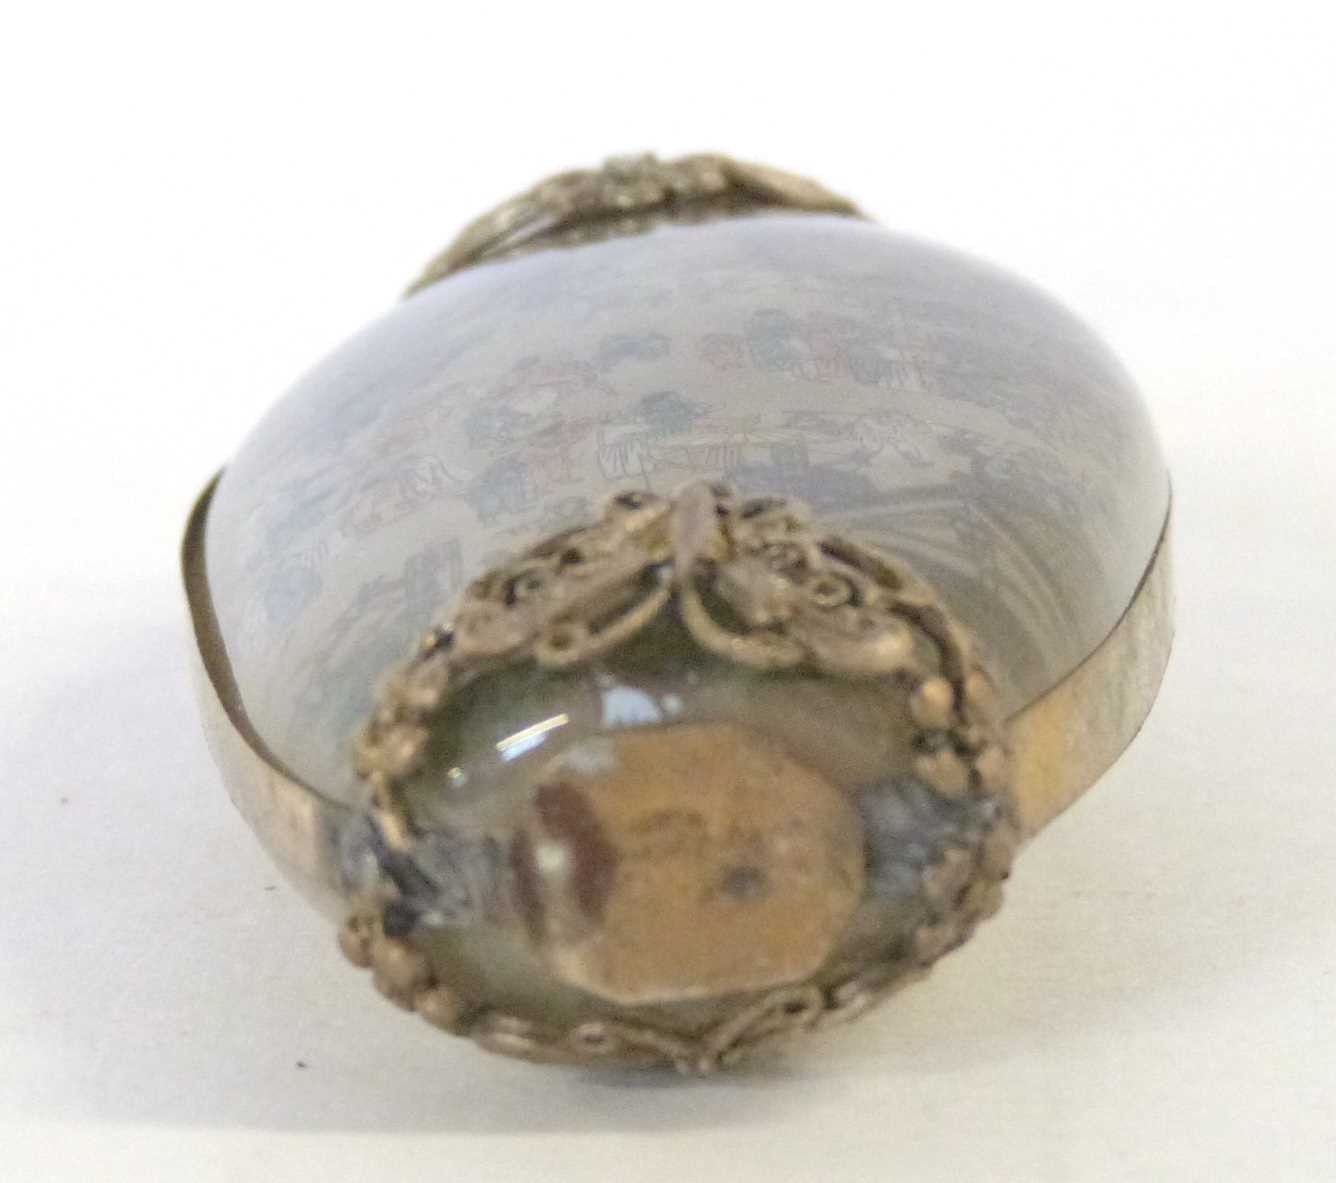 Antique Chinese reverse-painted snuff bottle with hardstone stopper and decorated with intricate - Image 4 of 8